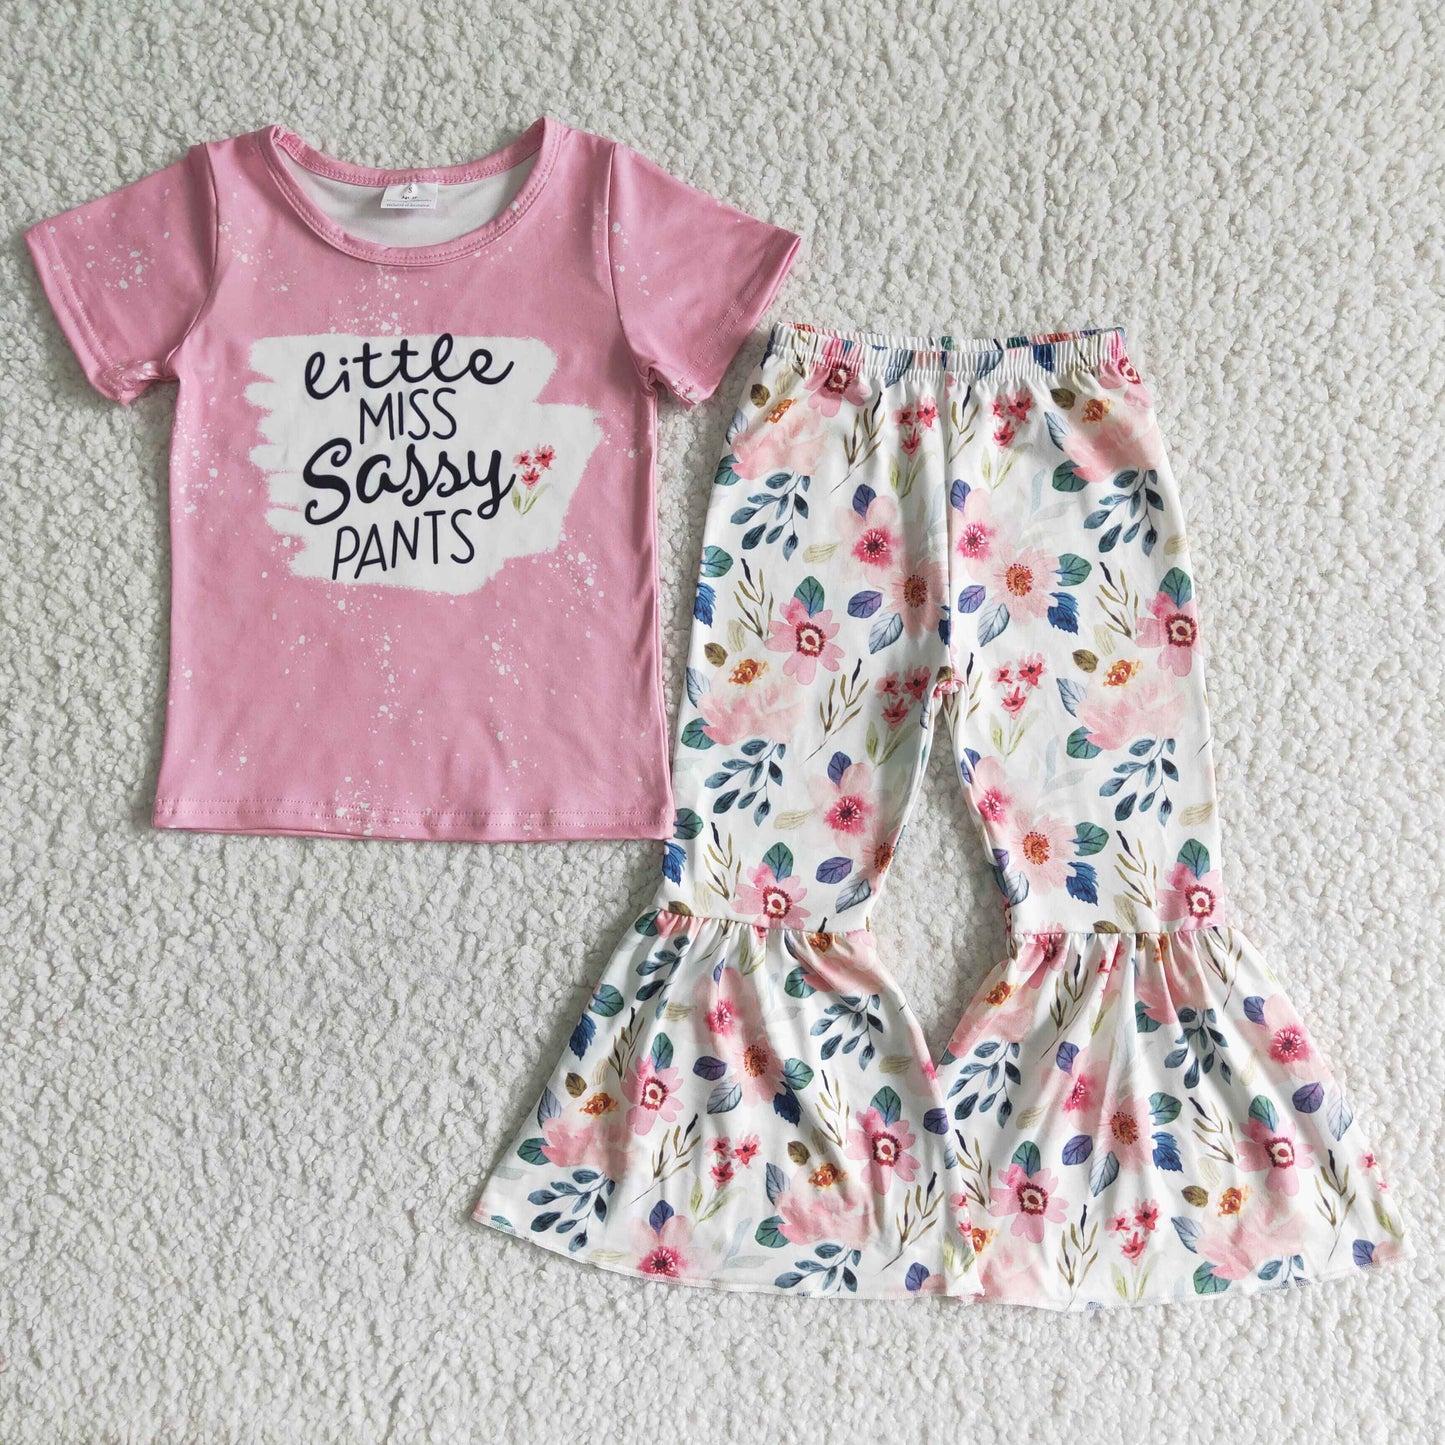 Little miss sassy pants shirt floral pants baby girl spring clothing